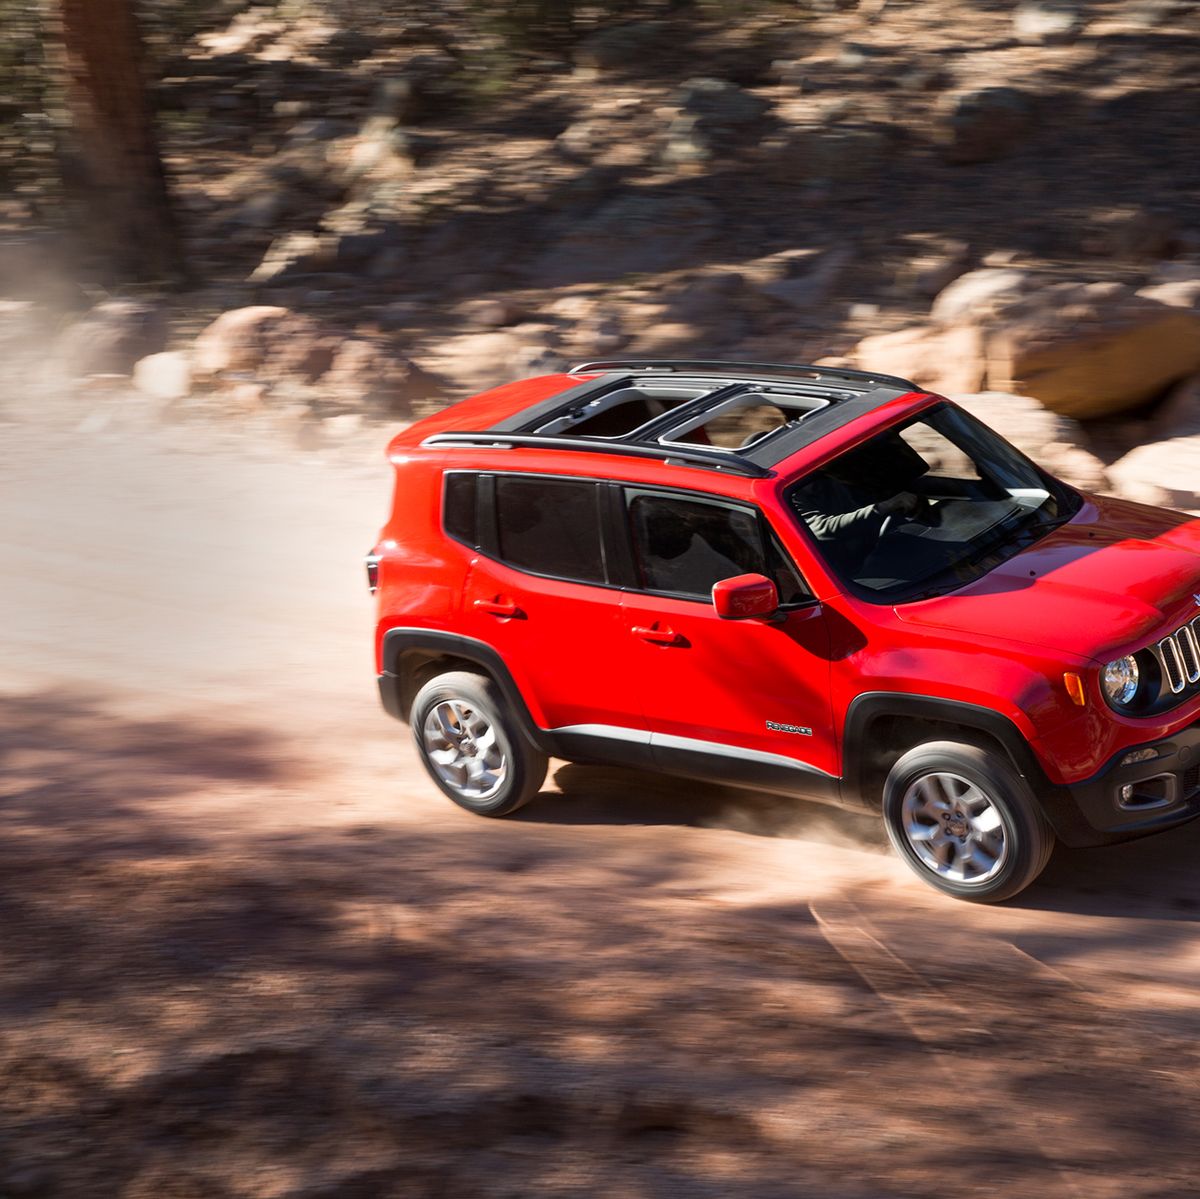 https://hips.hearstapps.com/hmg-prod/amv-prod-cad-assets/images/17q4/692997/2018-jeep-renegade-review-car-and-driver-photo-698735-s-original.jpg?crop=0.558xw:0.913xh;0.325xw,0&resize=1200:*